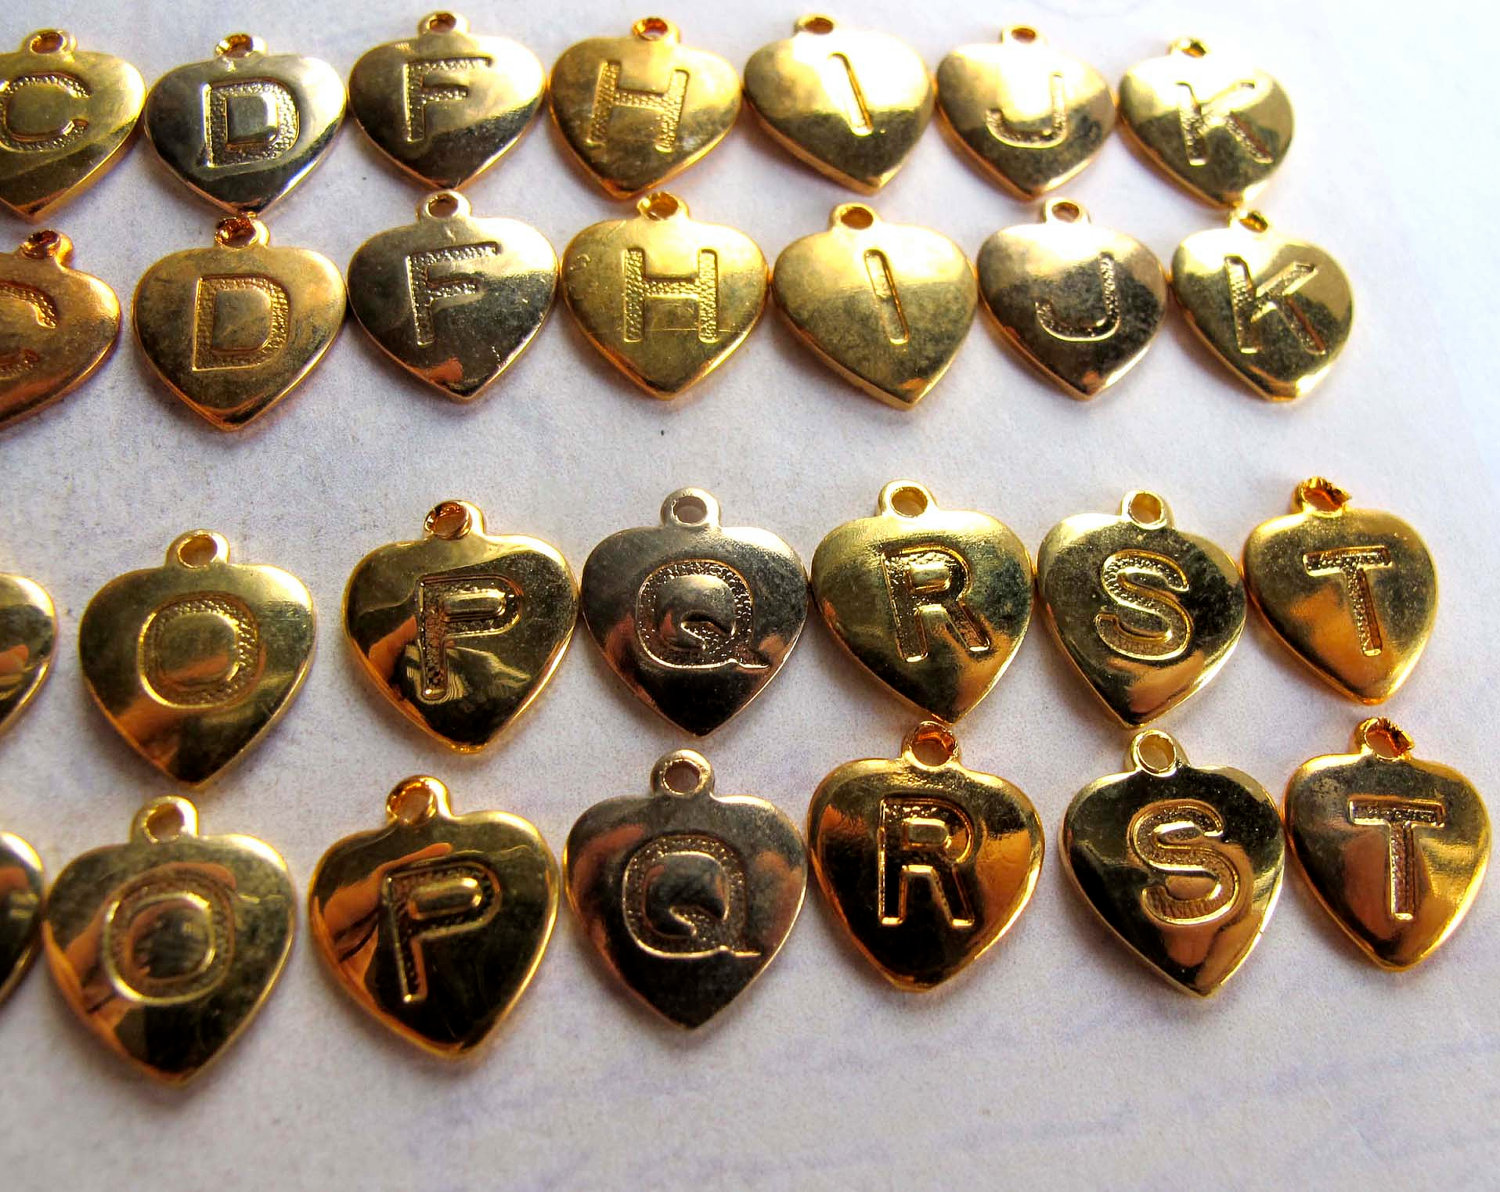 Initial Letter Charms - Gold Plated Mini Alphabet Charms for Bracelet B